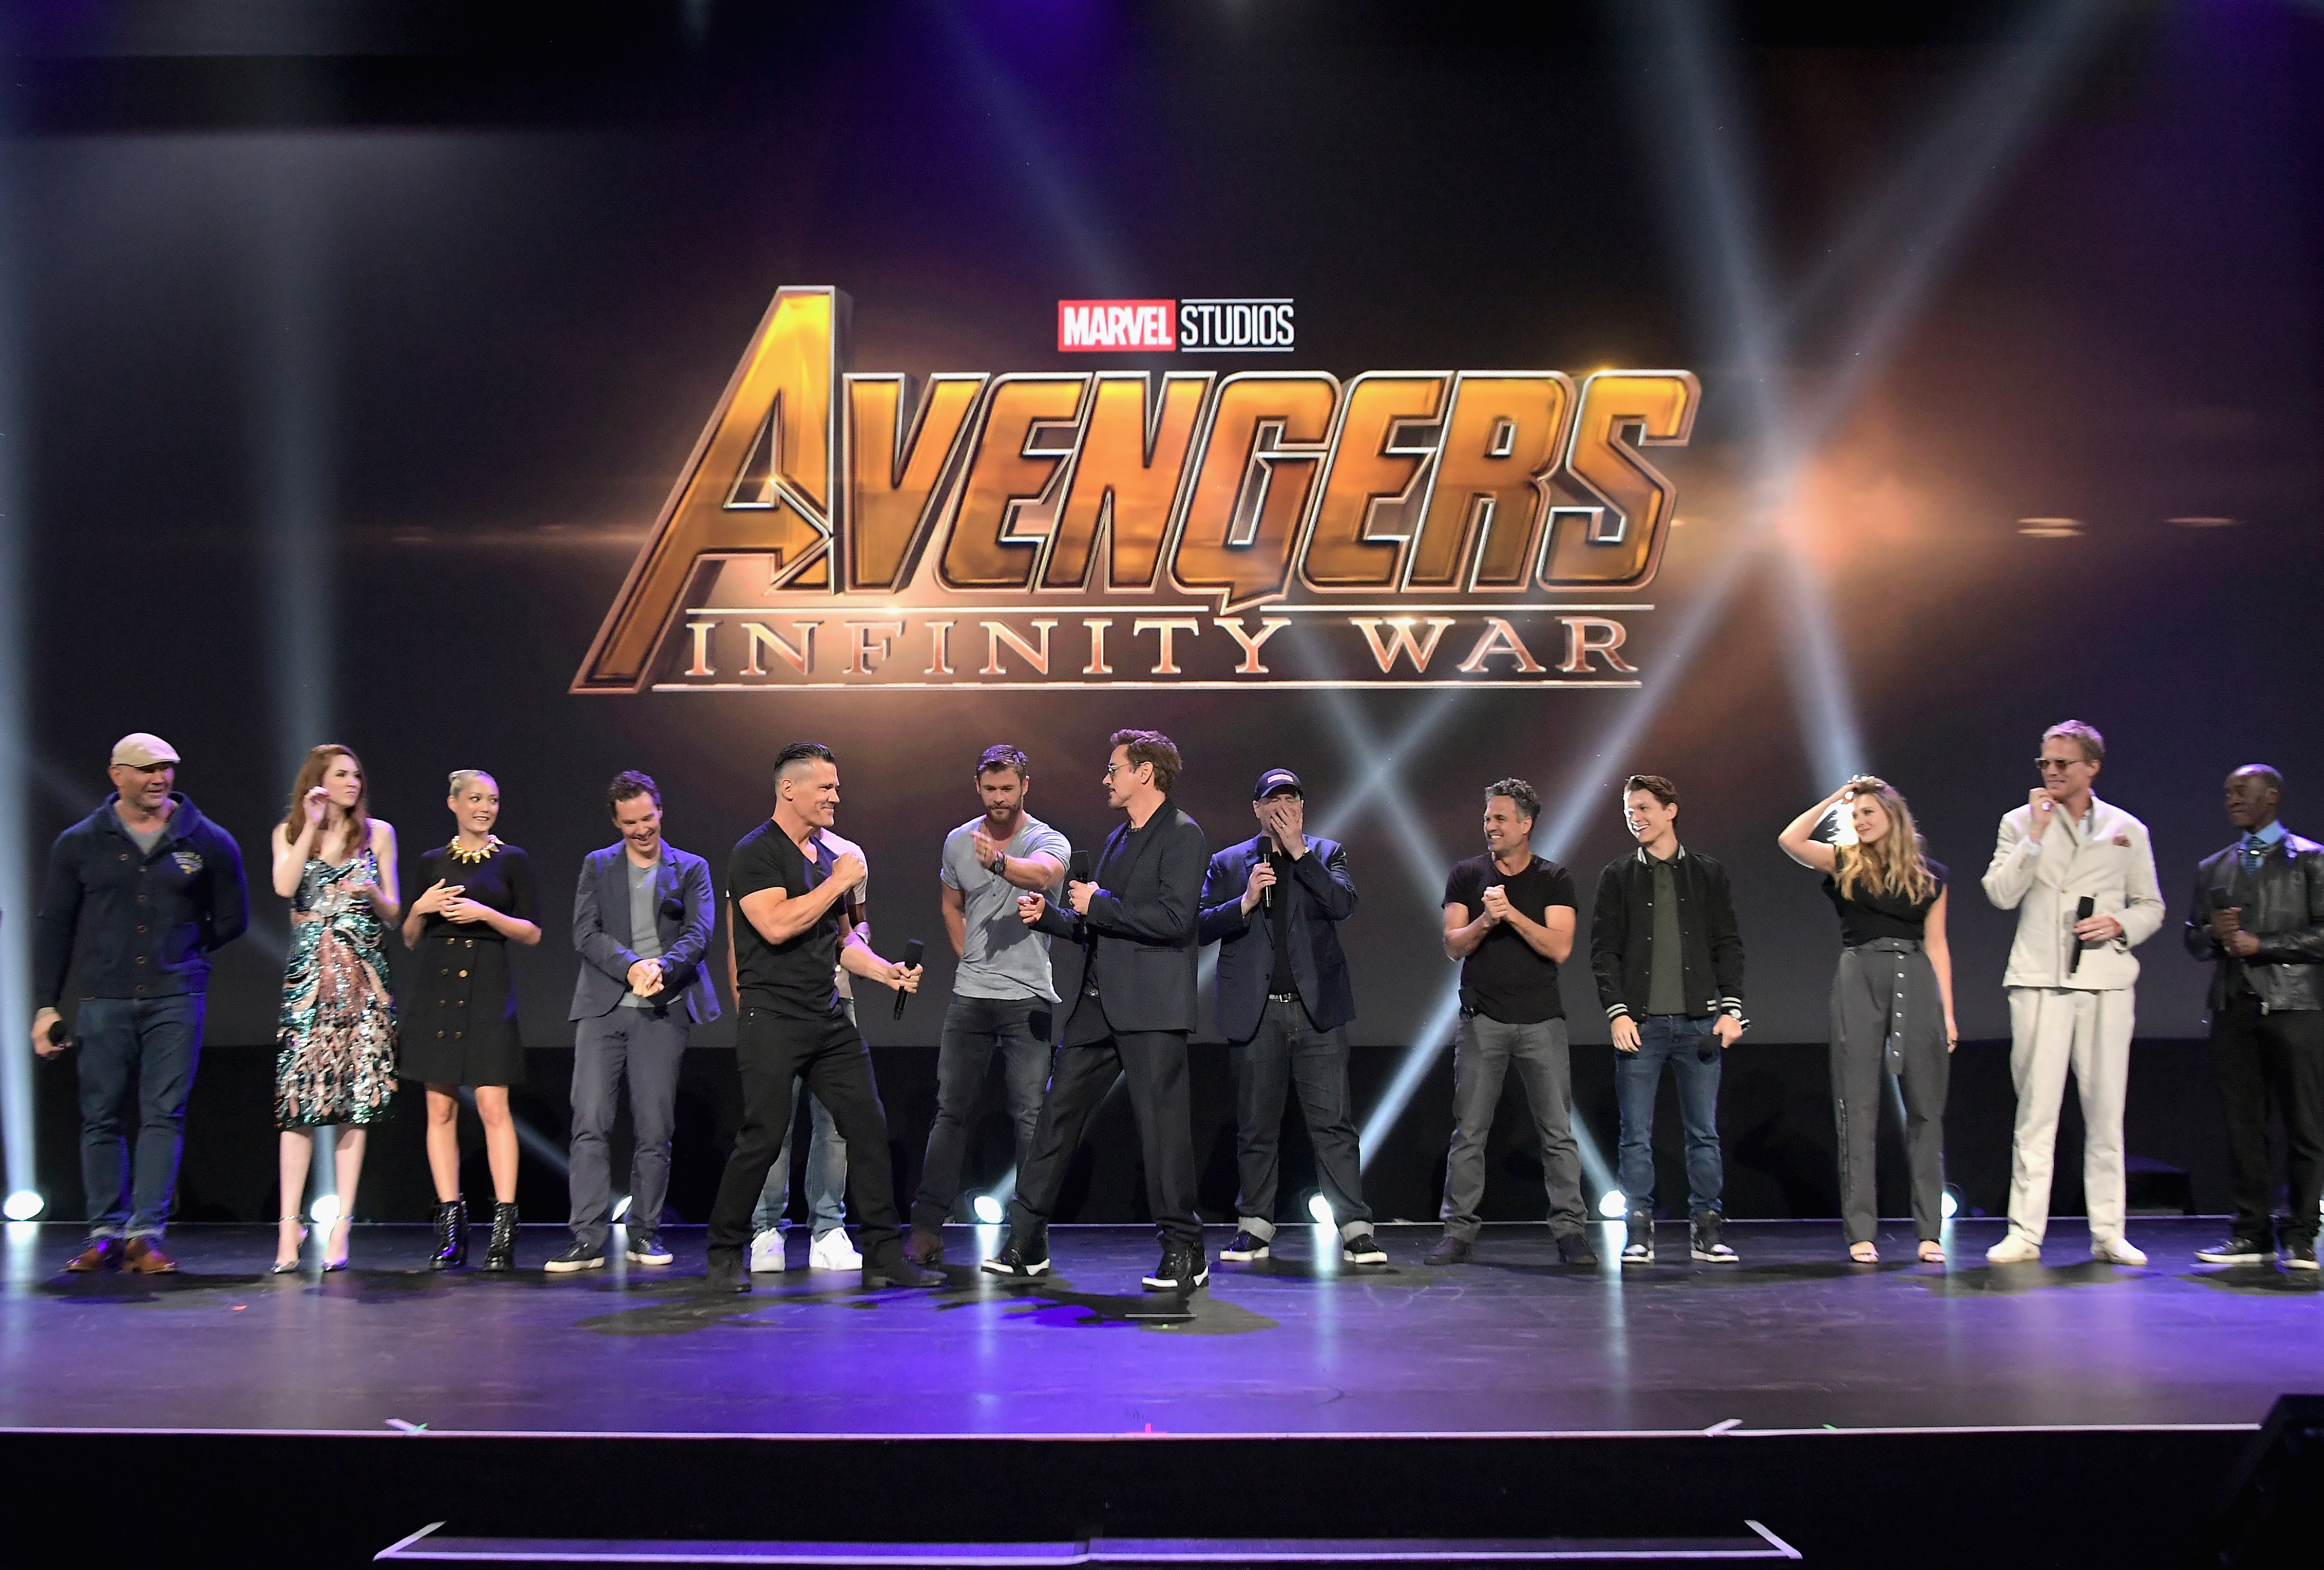 The Avengers Infinity War Trailer has FINALLY Been Released to the Masses